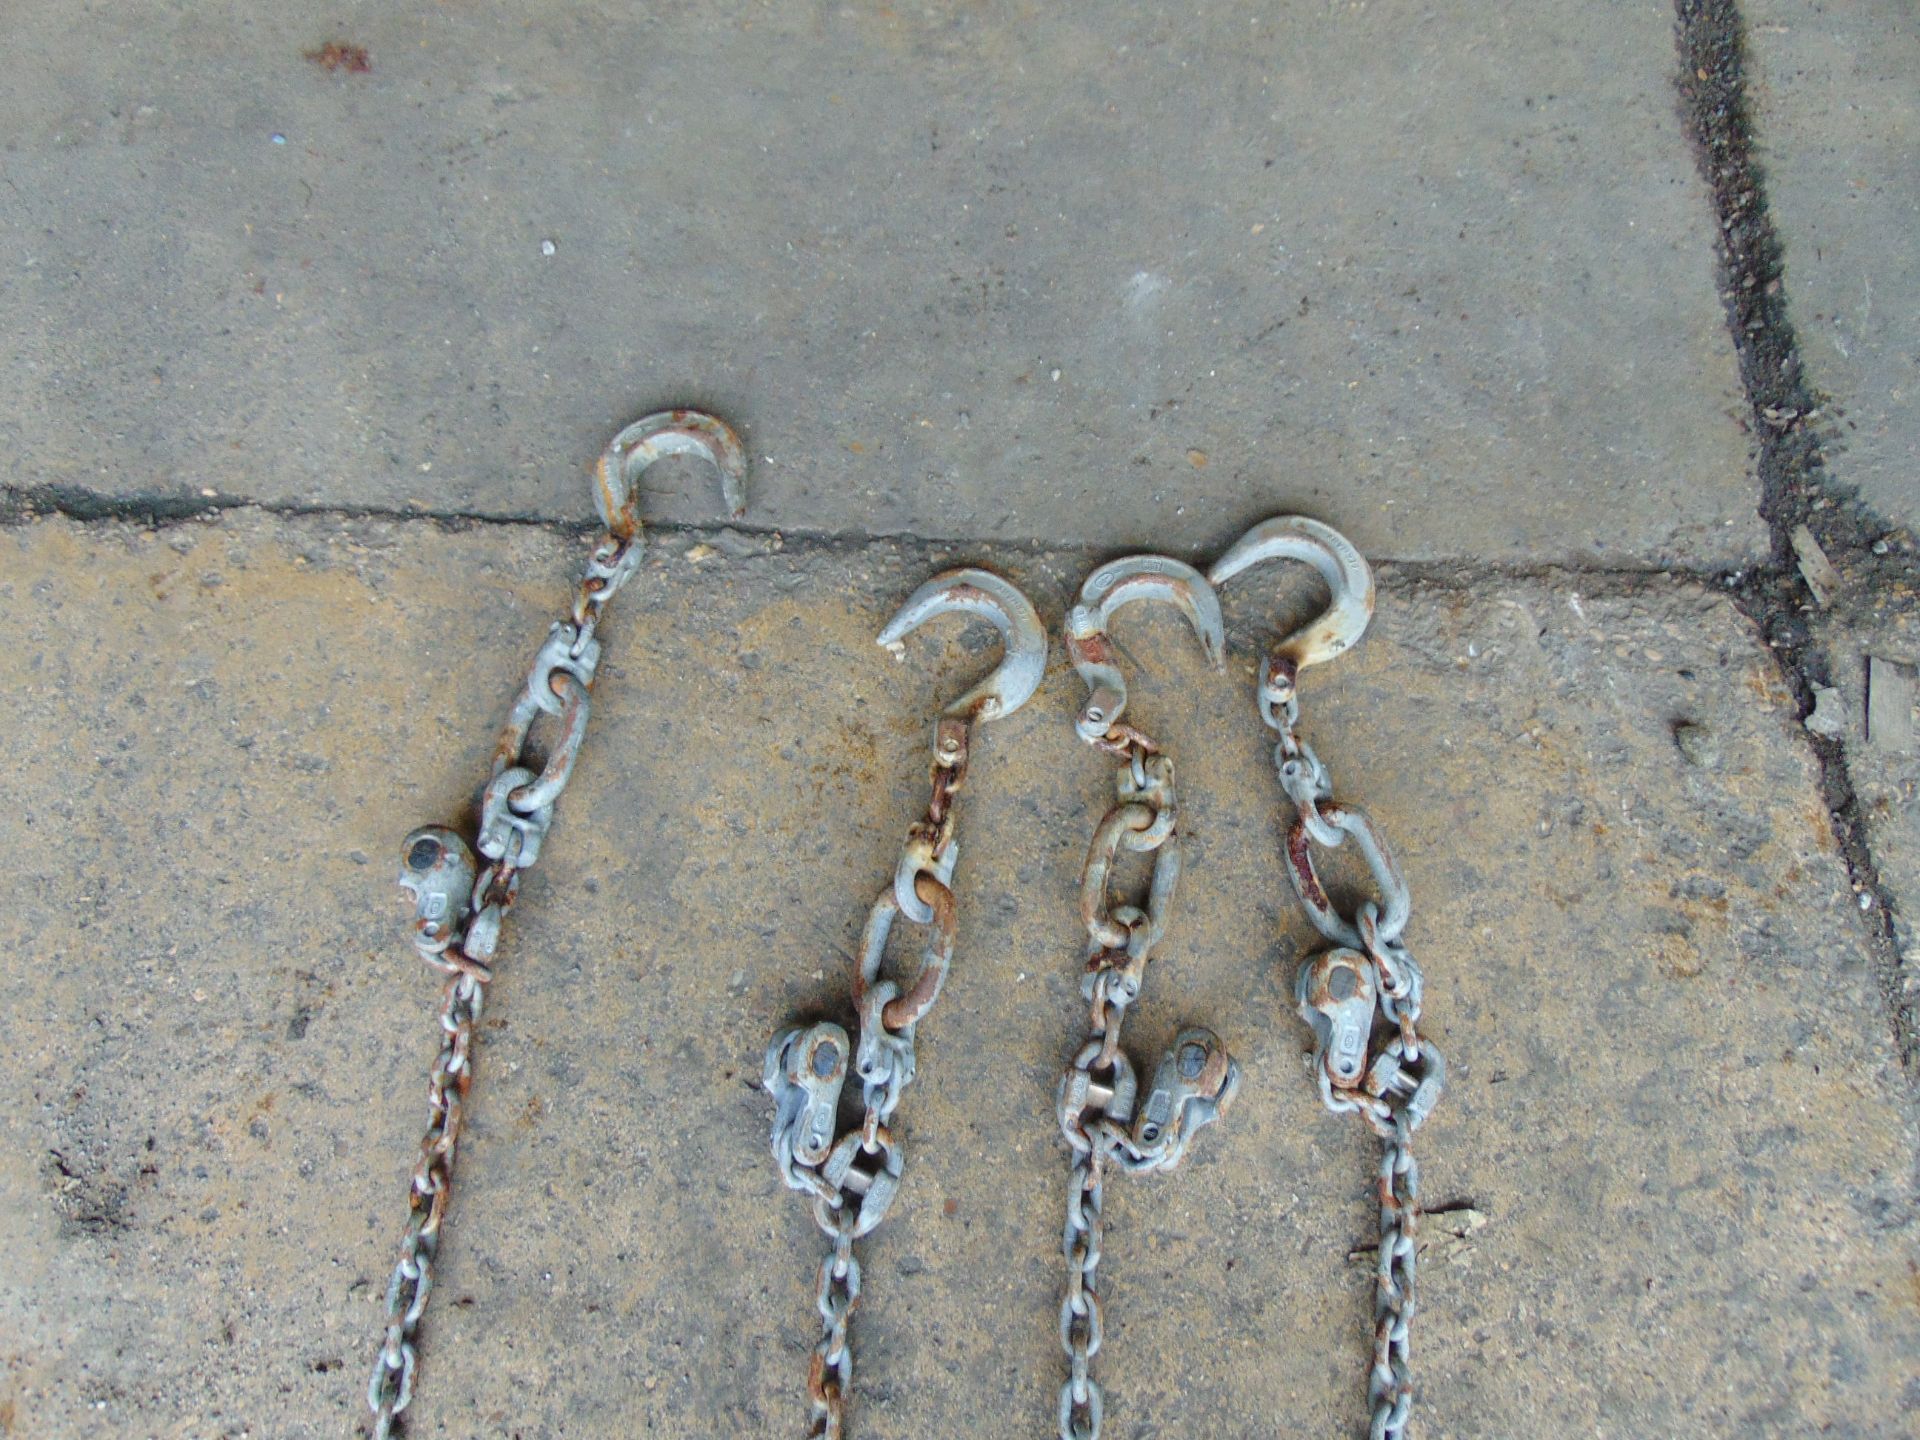 4 x 6ft Heavy-Duty Chains - Image 5 of 5